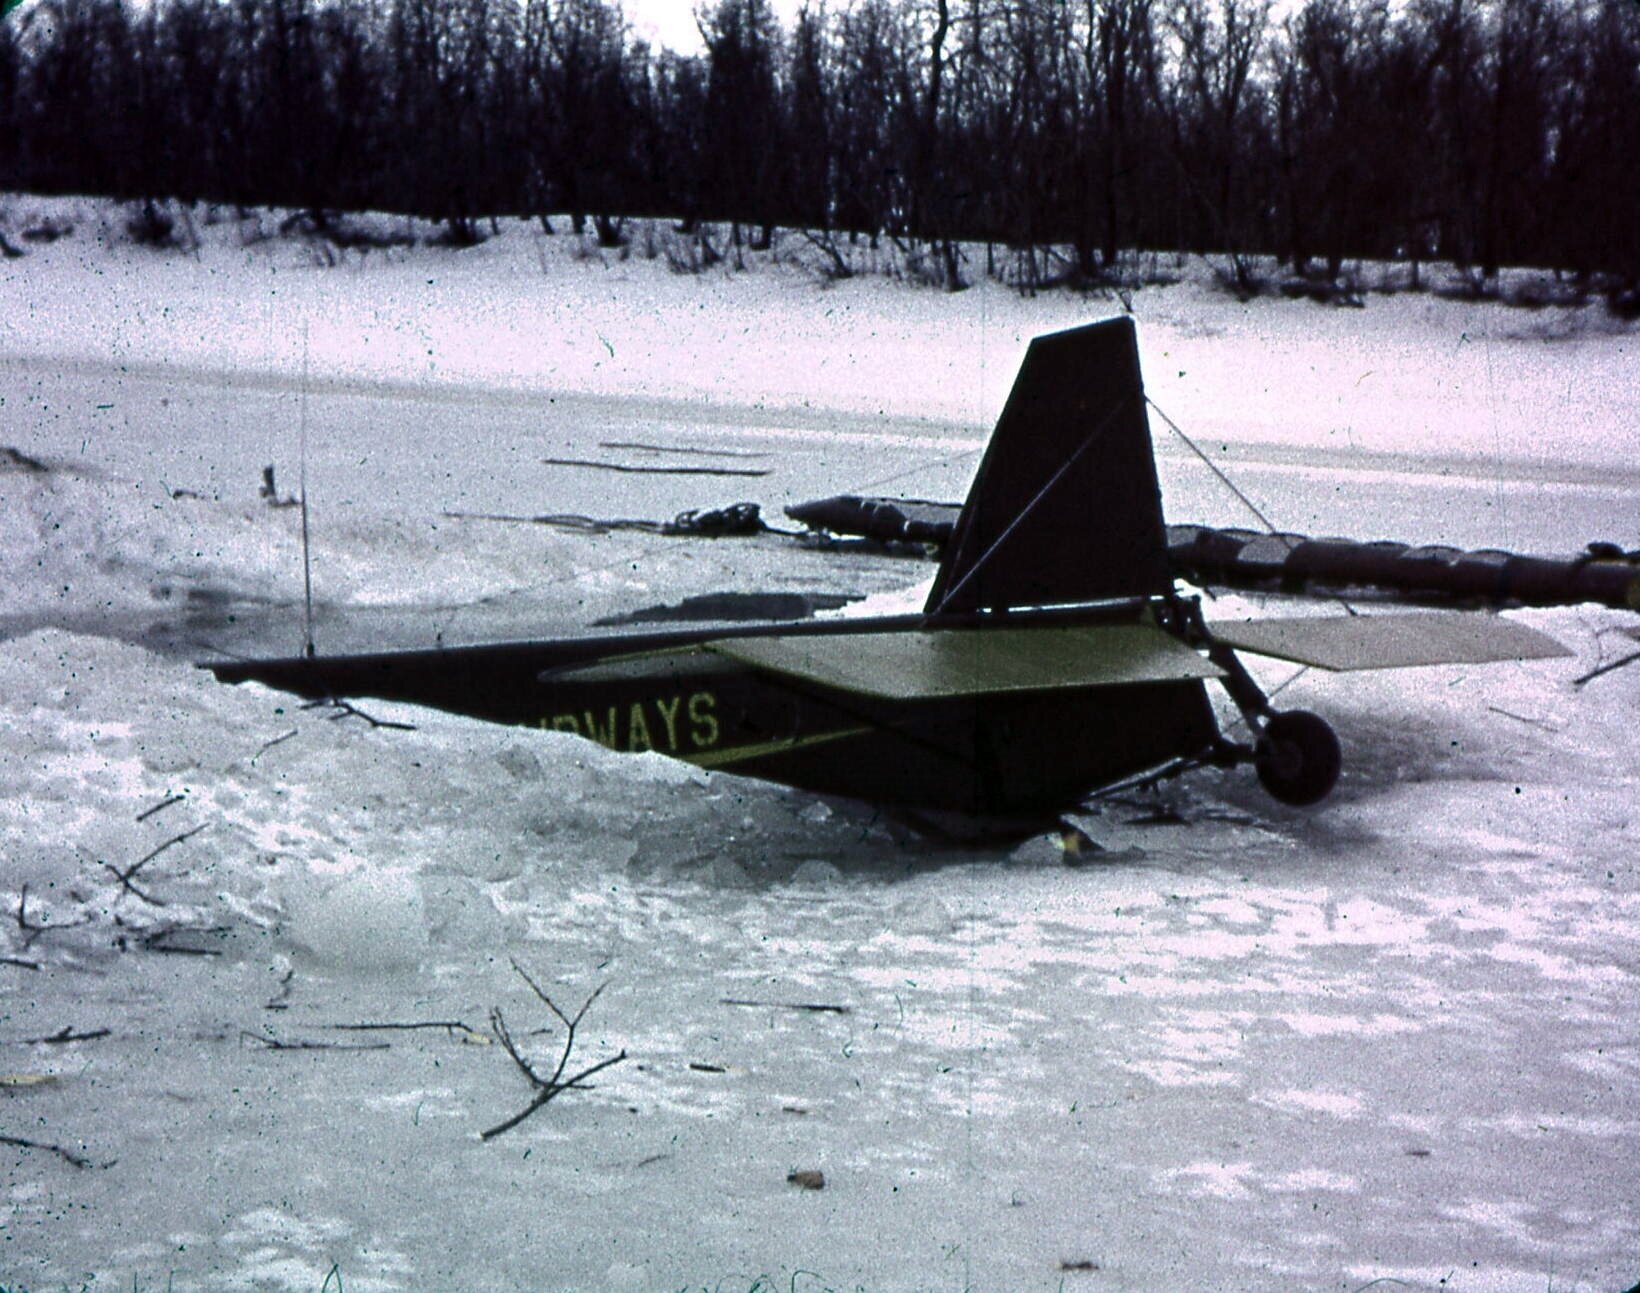  1940s Airplane through the ice at Kwethluk. Photo on loan from the Henkelman Archives. 